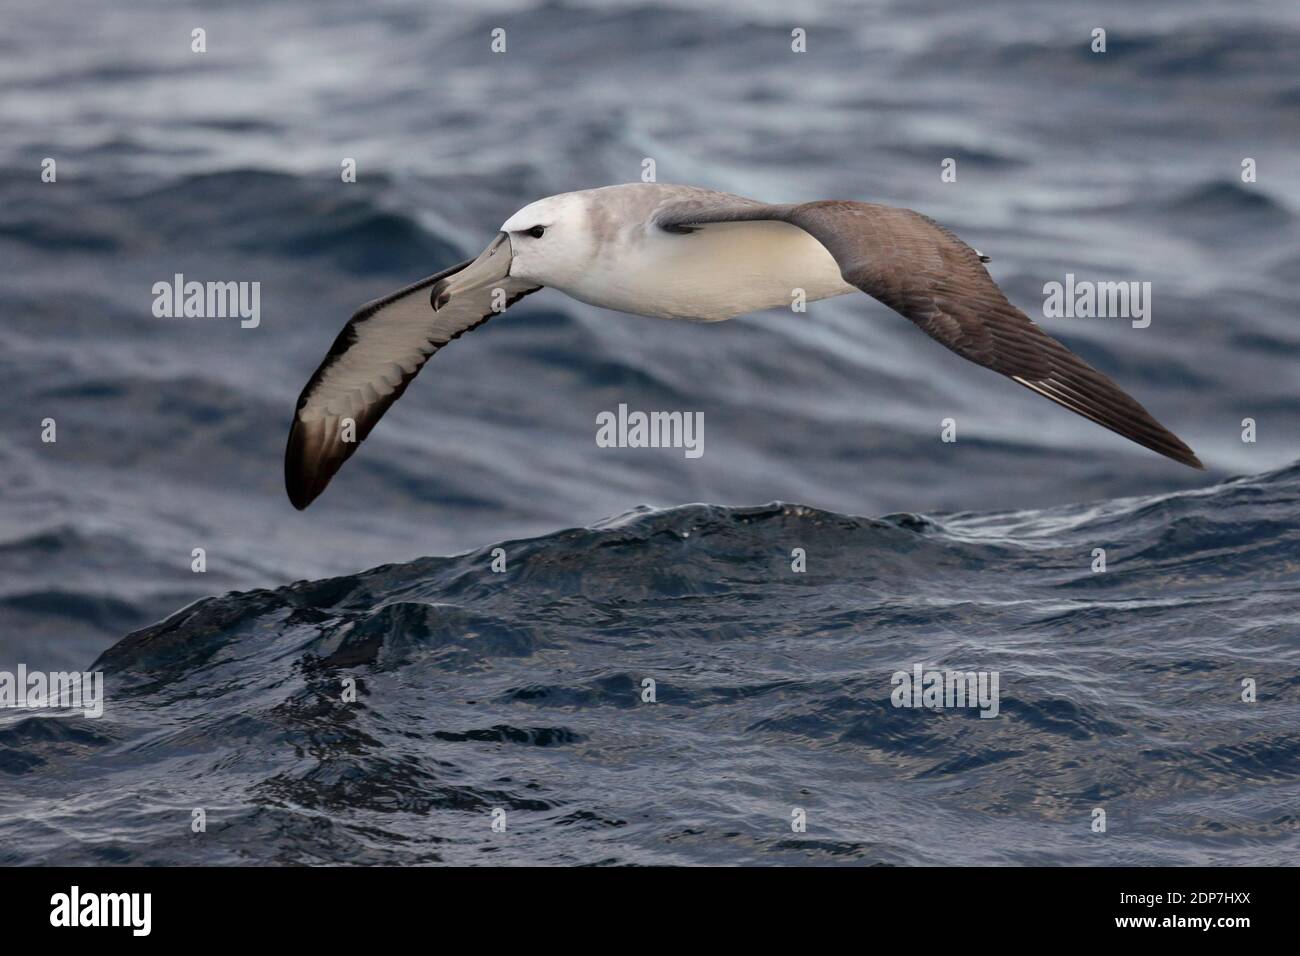 White-capped Albatross (Thalassarche steadi), 2nd cycle bird, flying at sea close to waves, New Zealand March 2013 Stock Photo